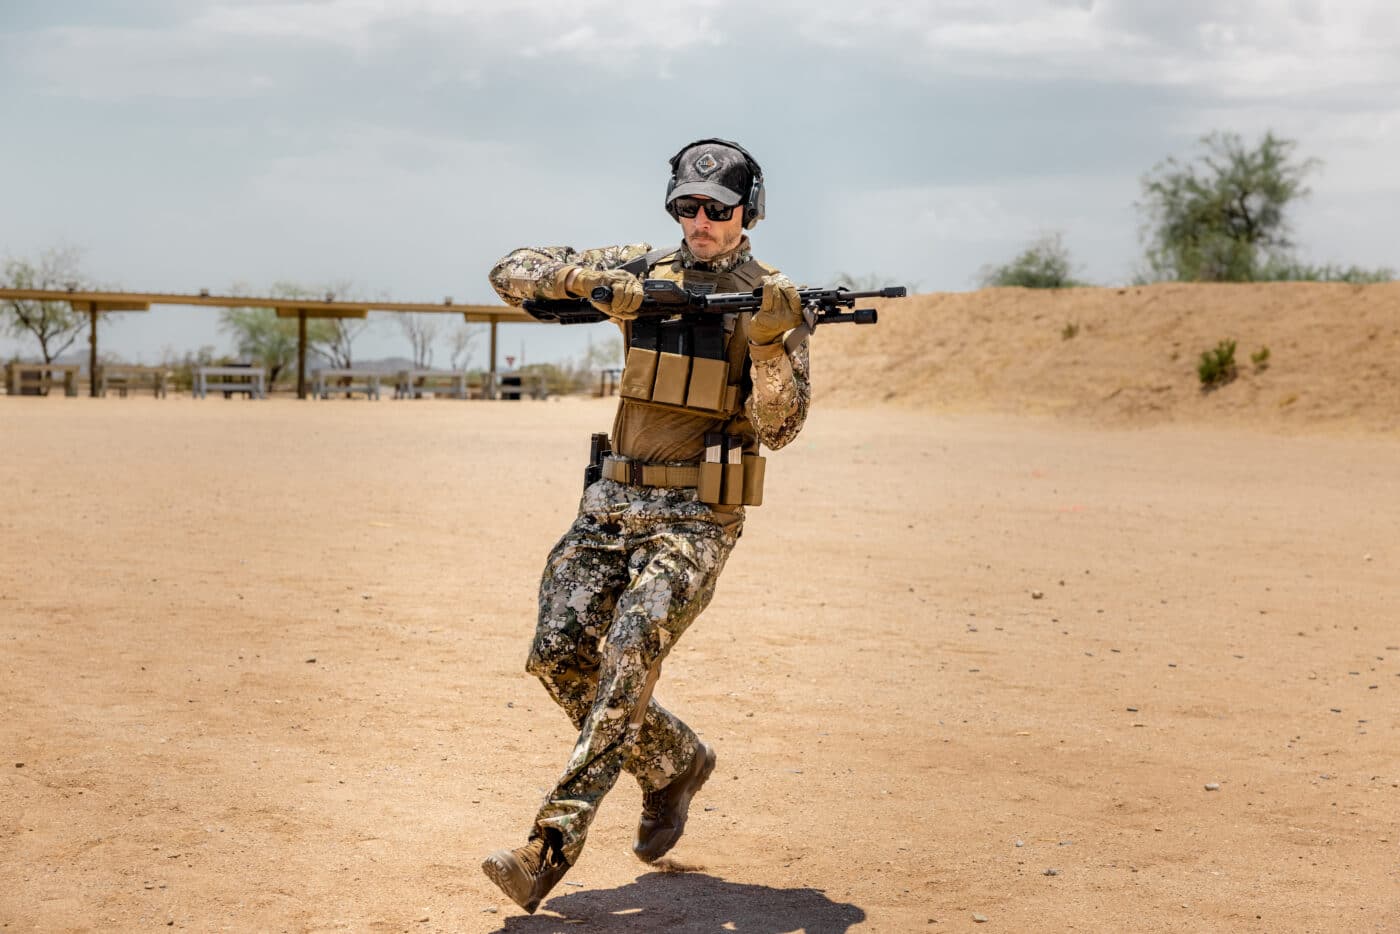 Man moving while training with AR-15 rifle